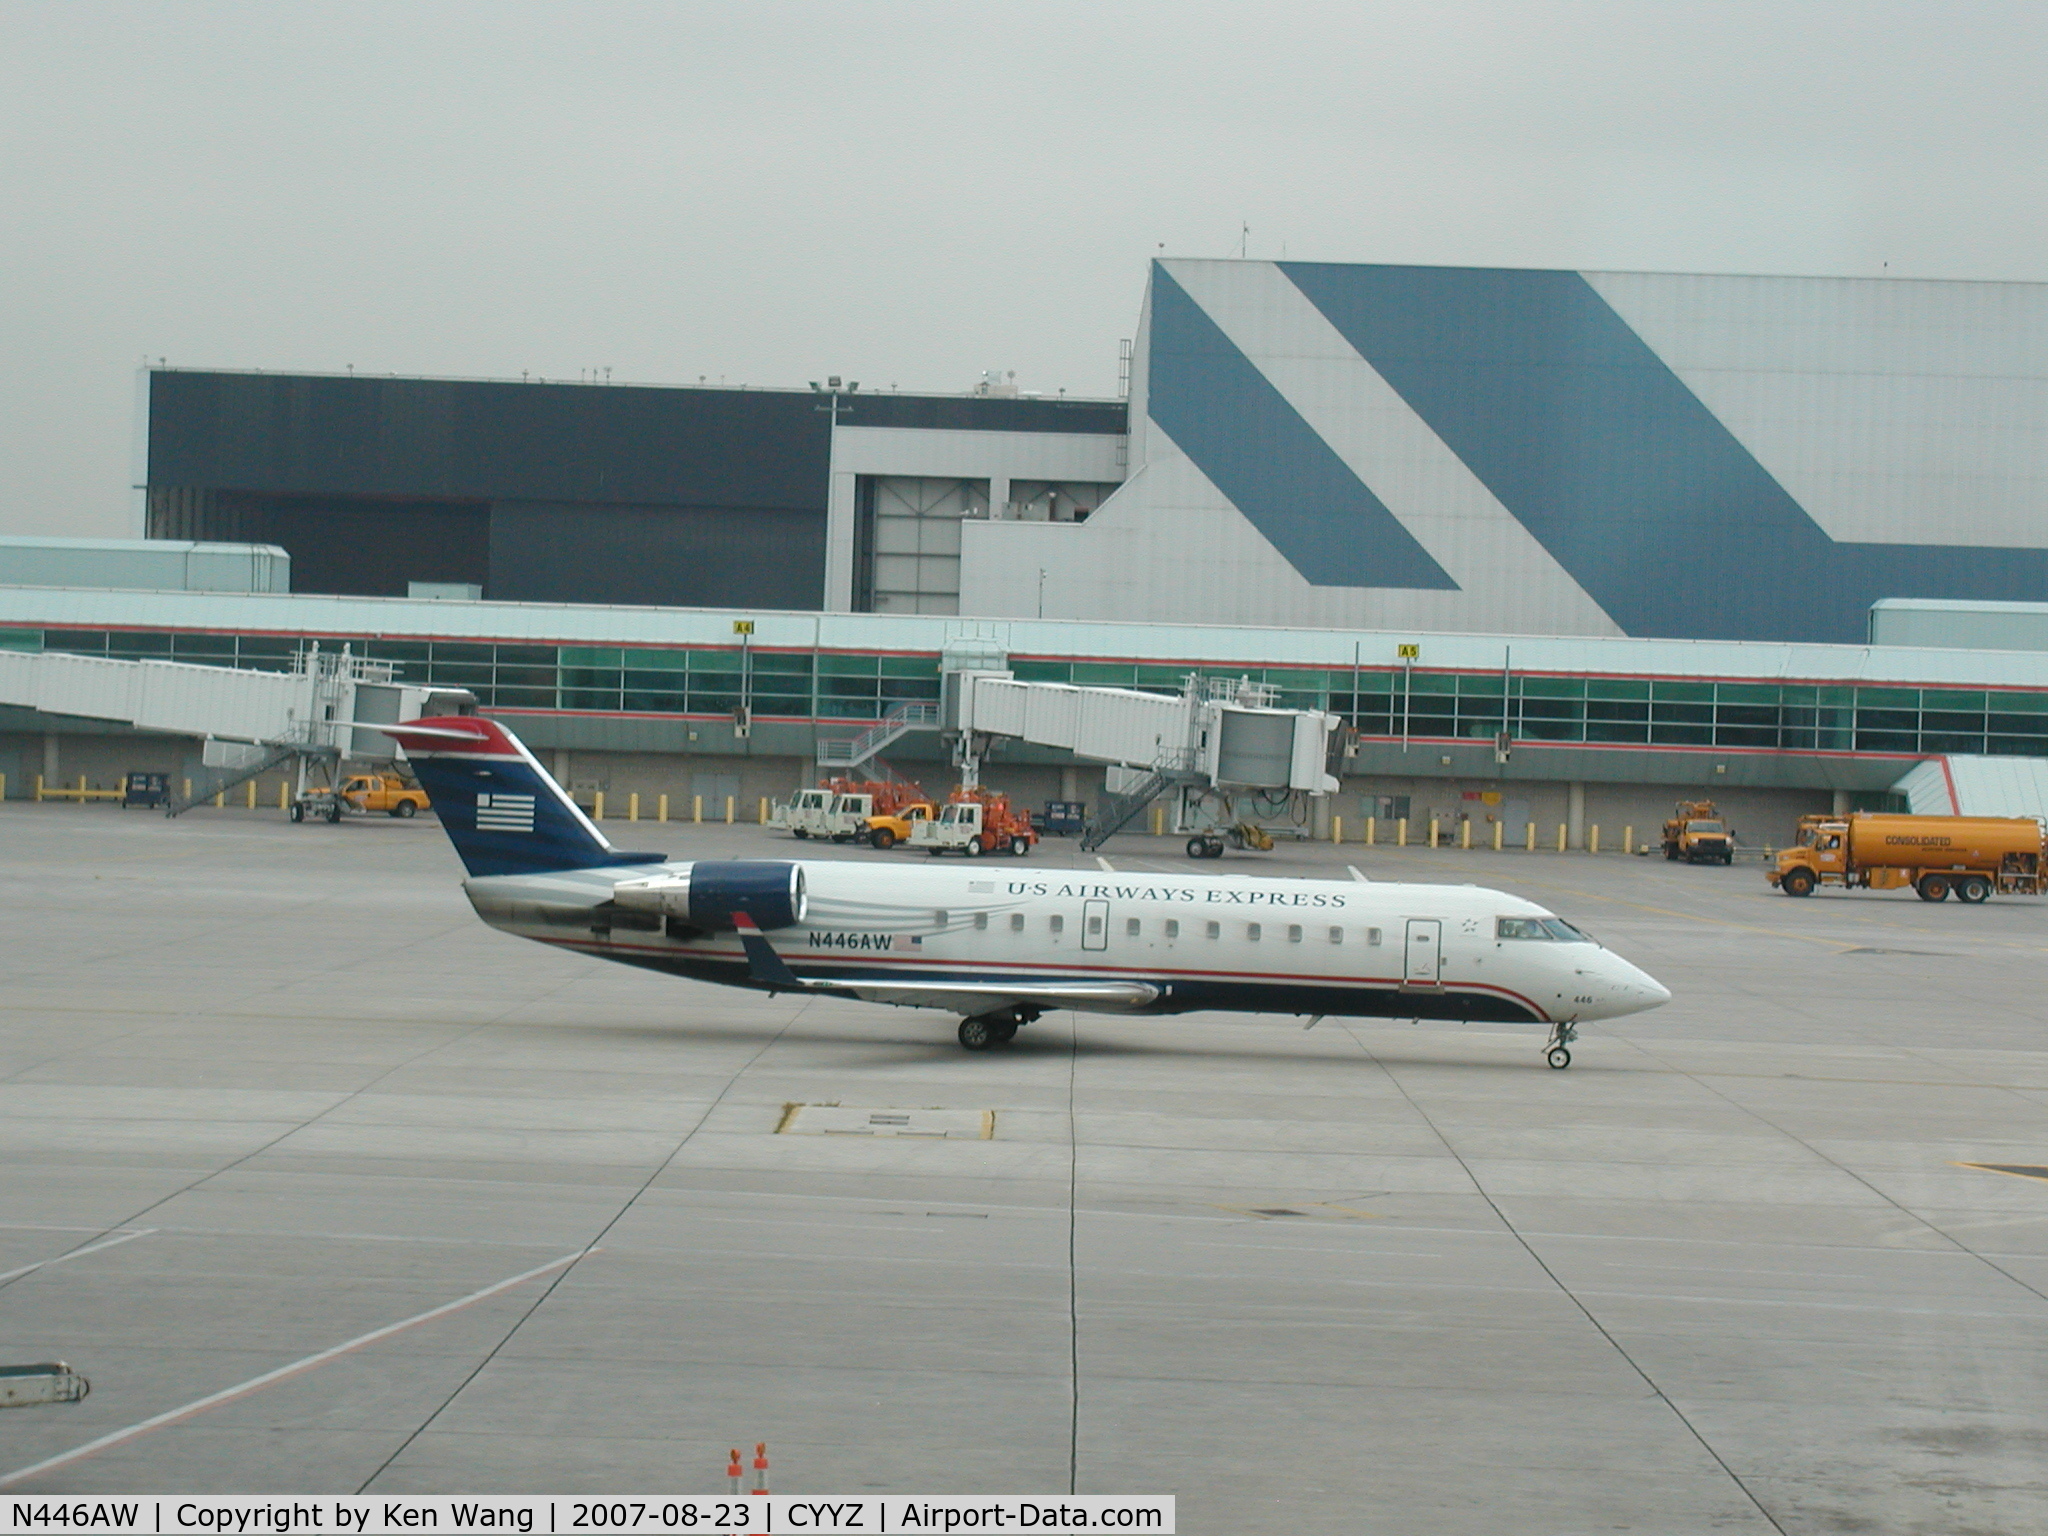 N446AW, 2003 Canadair CRJ-200LR (CL-600-2B19) C/N 7806, US Airways Bombardier Cl600 just arrived at Toronto Pearson Airport